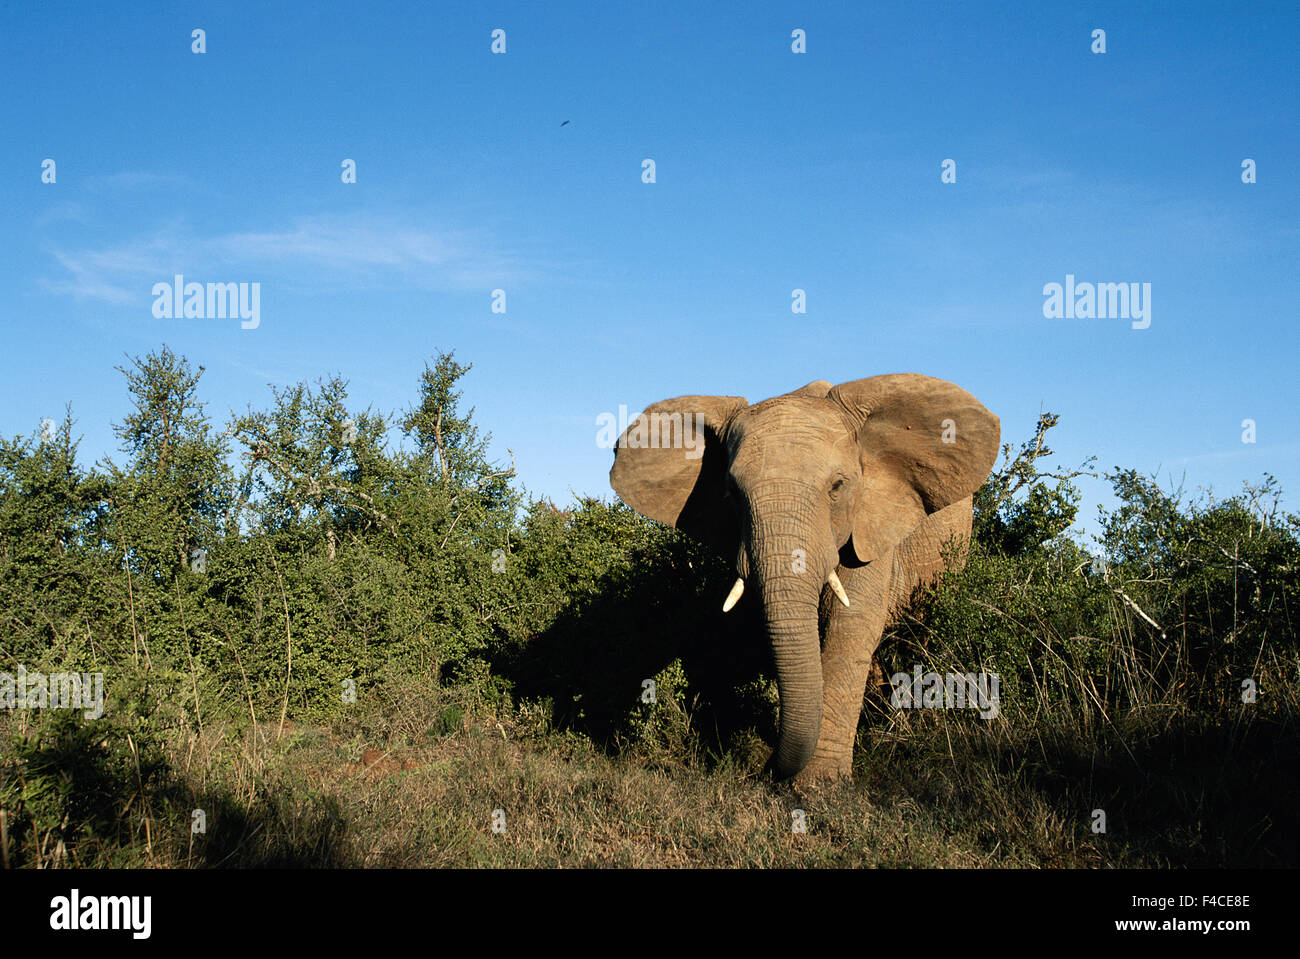 South Africa, Addo Elephant National Park, Elephant standing at forest edge (Large format sizes available) Stock Photo